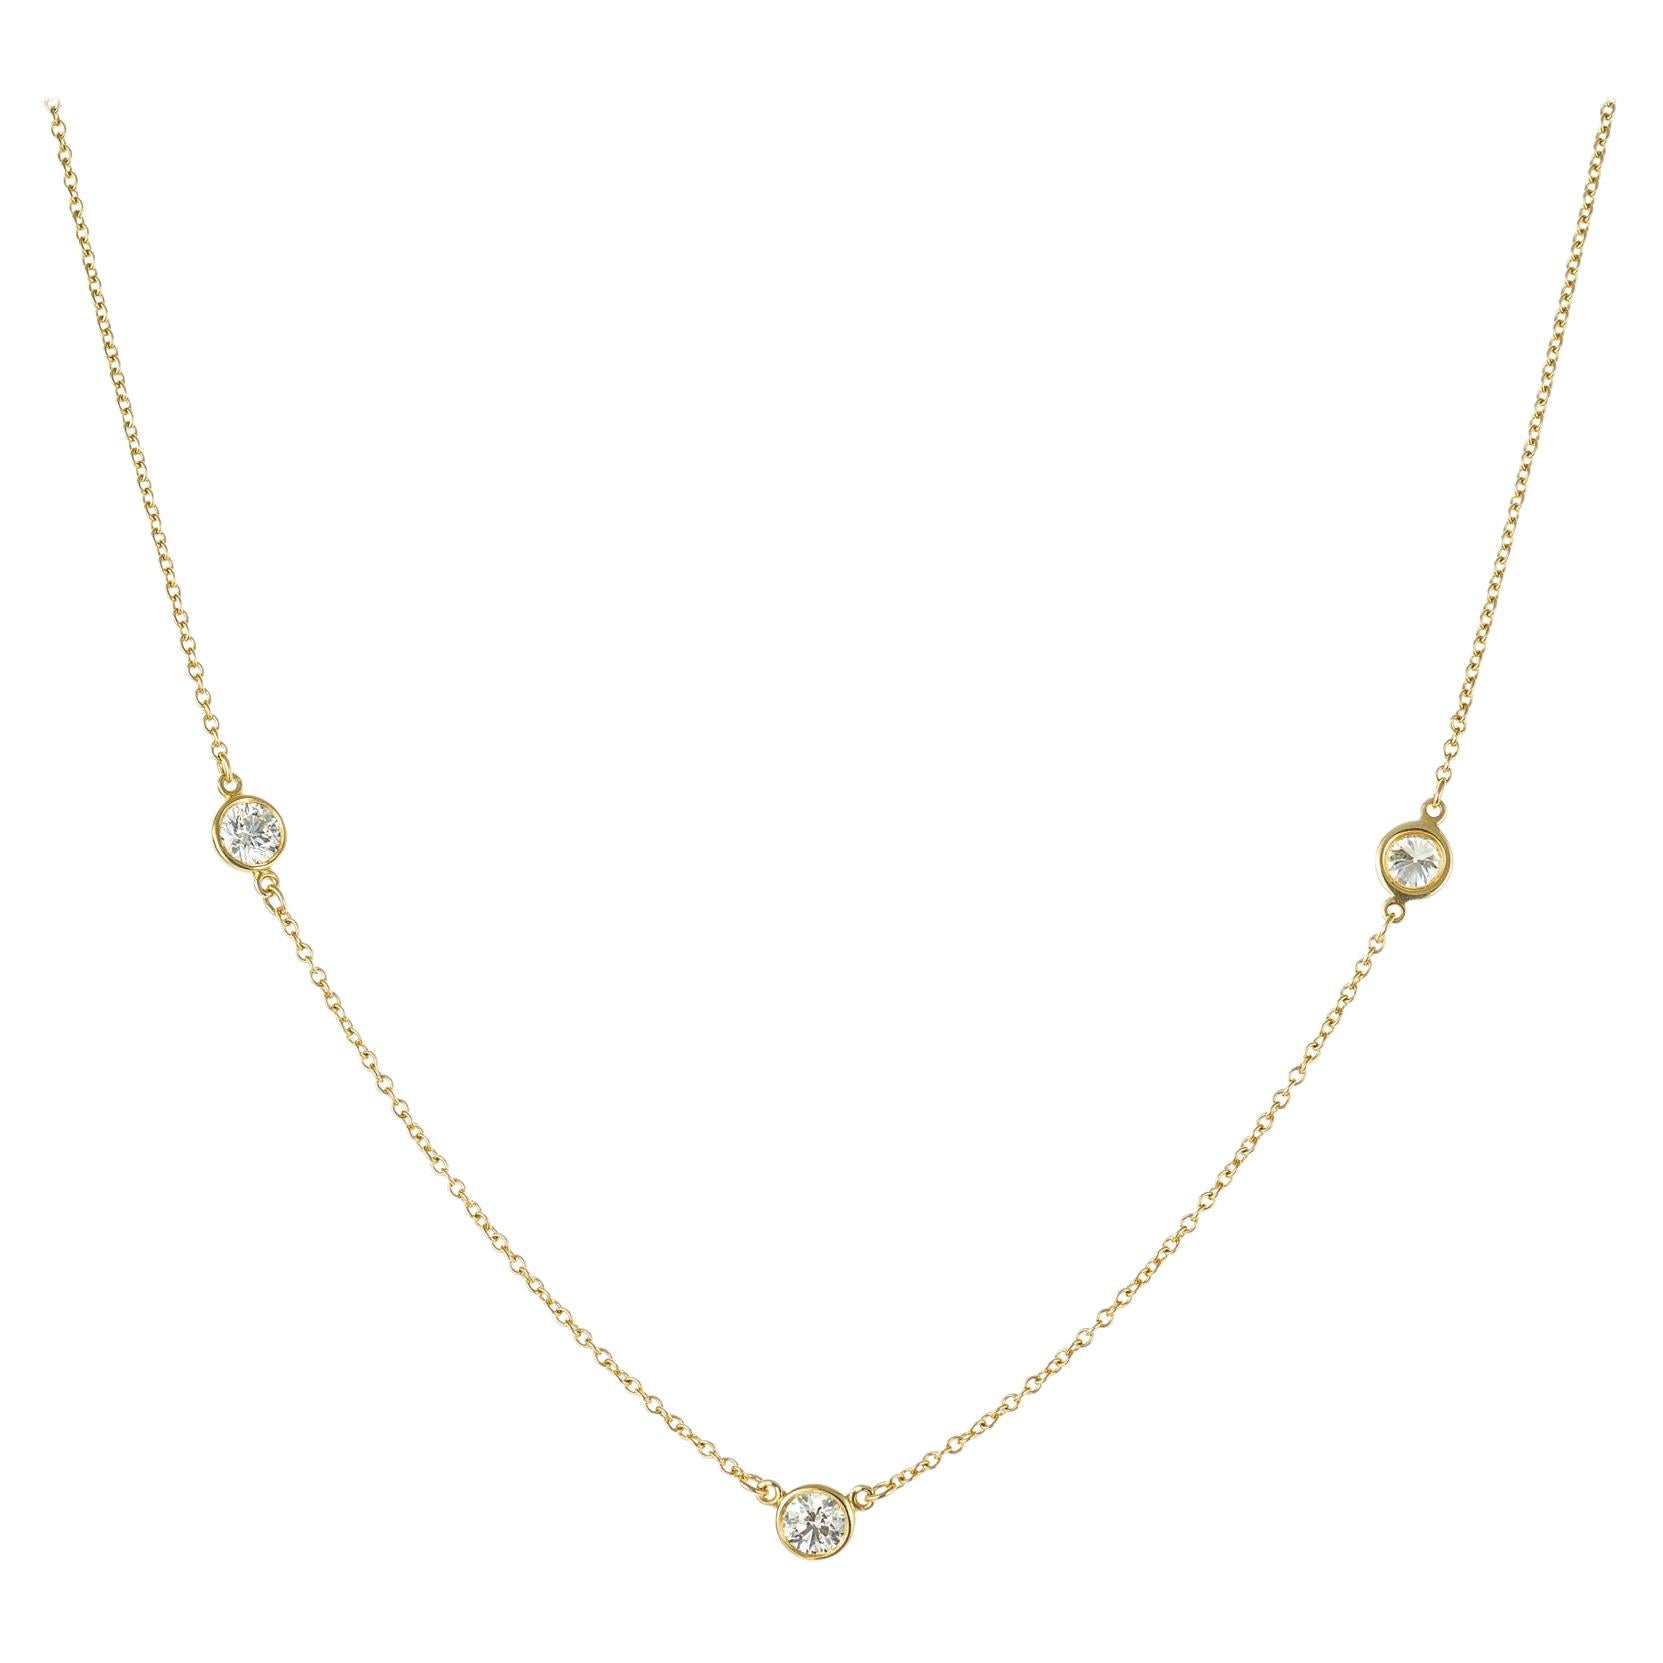 Tiffany & Co. Elsa Peretti .69 Carat Diamond by The Yard Yellow Gold Necklace For Sale